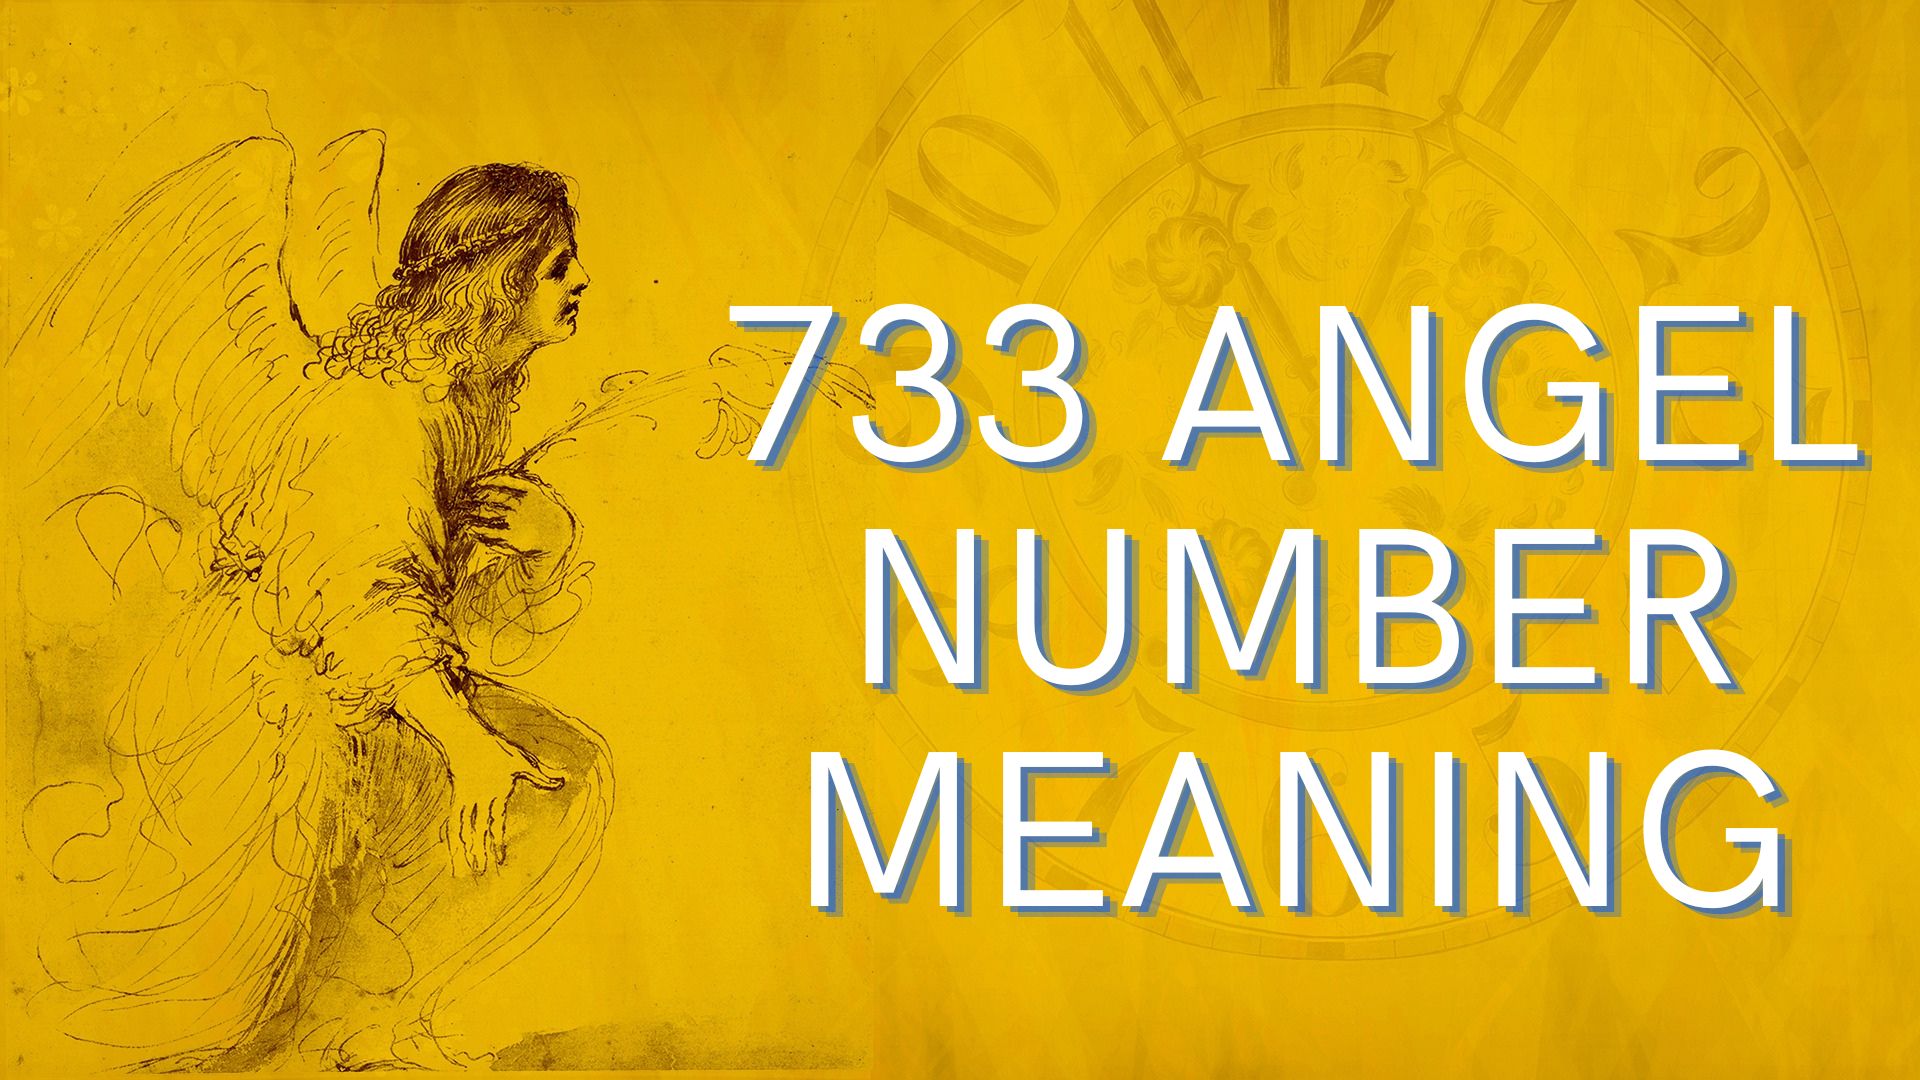 733 Angel Number Meaning - Inspiration And Enlightenment